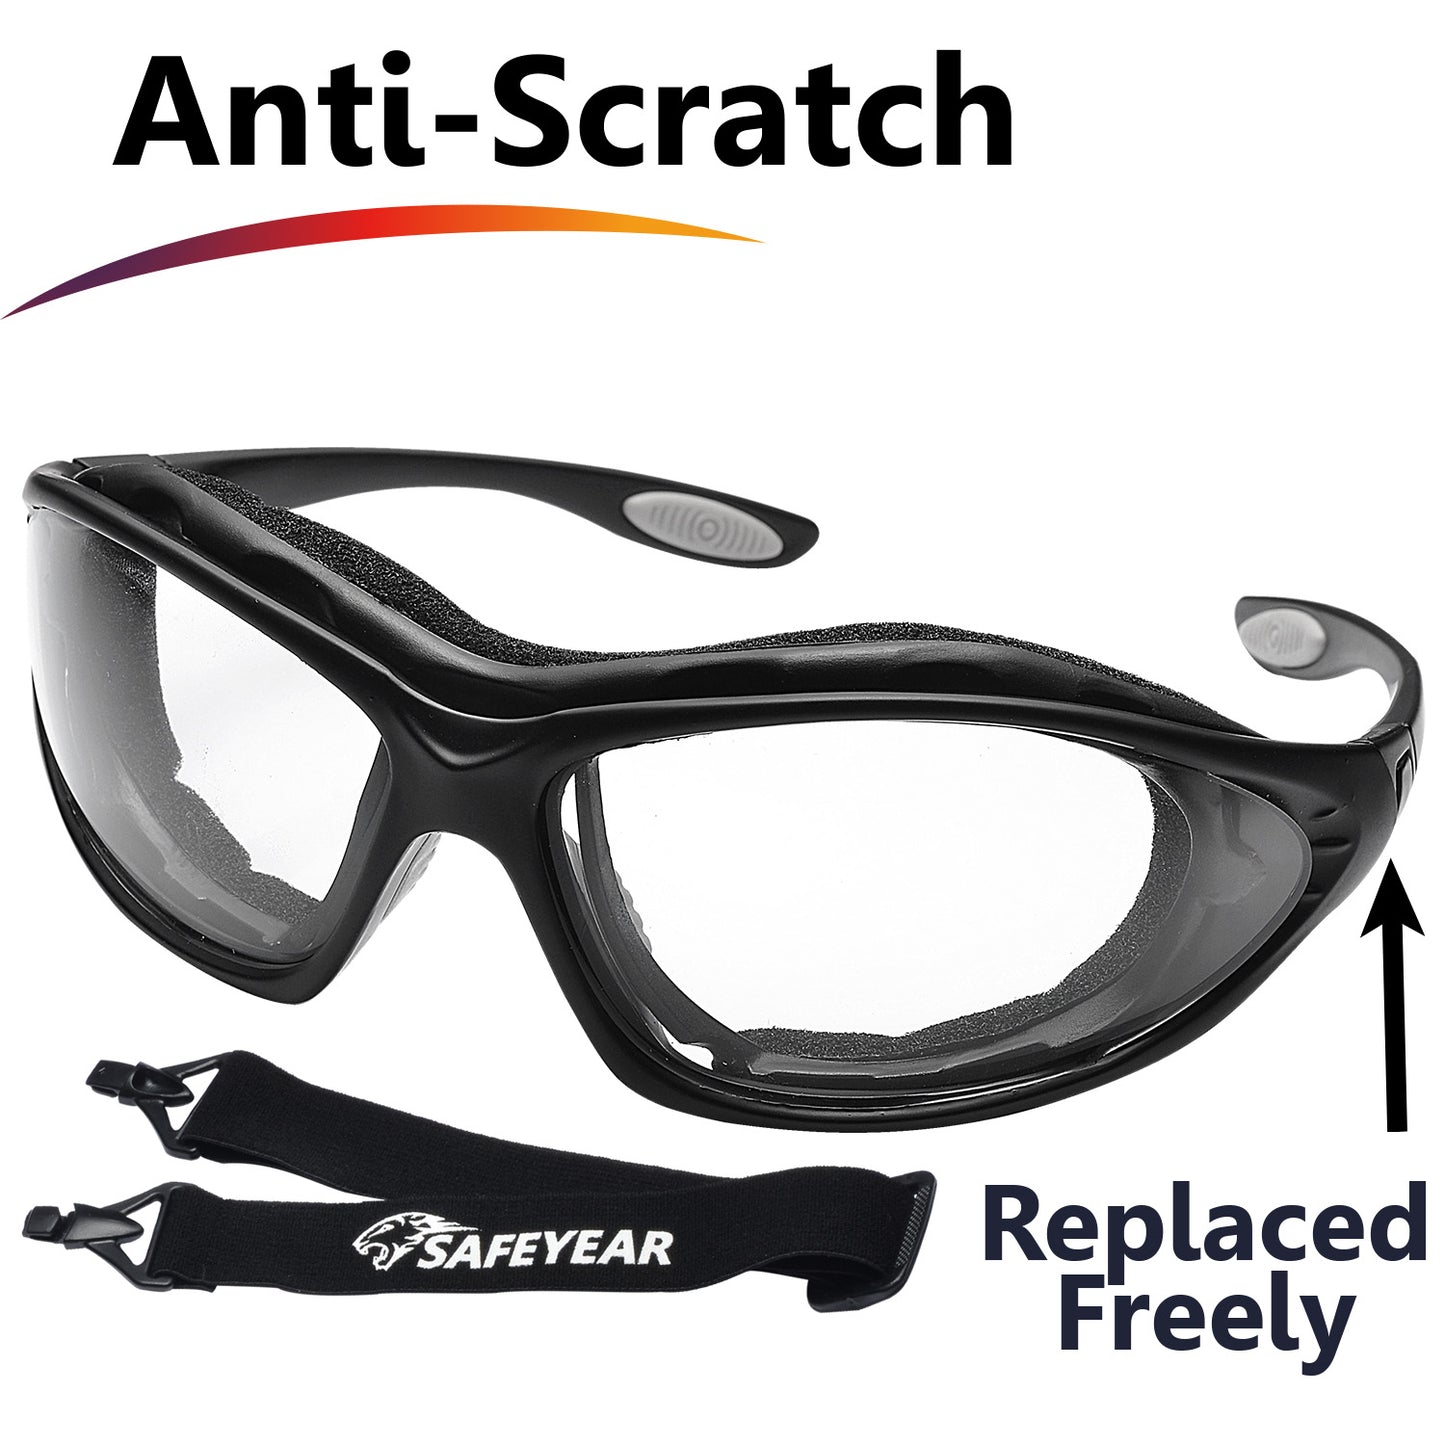 SAFEYEAR Anti Fog Safety Glasses- SG002 Clear Scratch Resistant Work Glasses for Men and Women No-Slip Grips, VU Protection Safety Goggles for DIY, Lab, Welding, Grinding, Chemistry